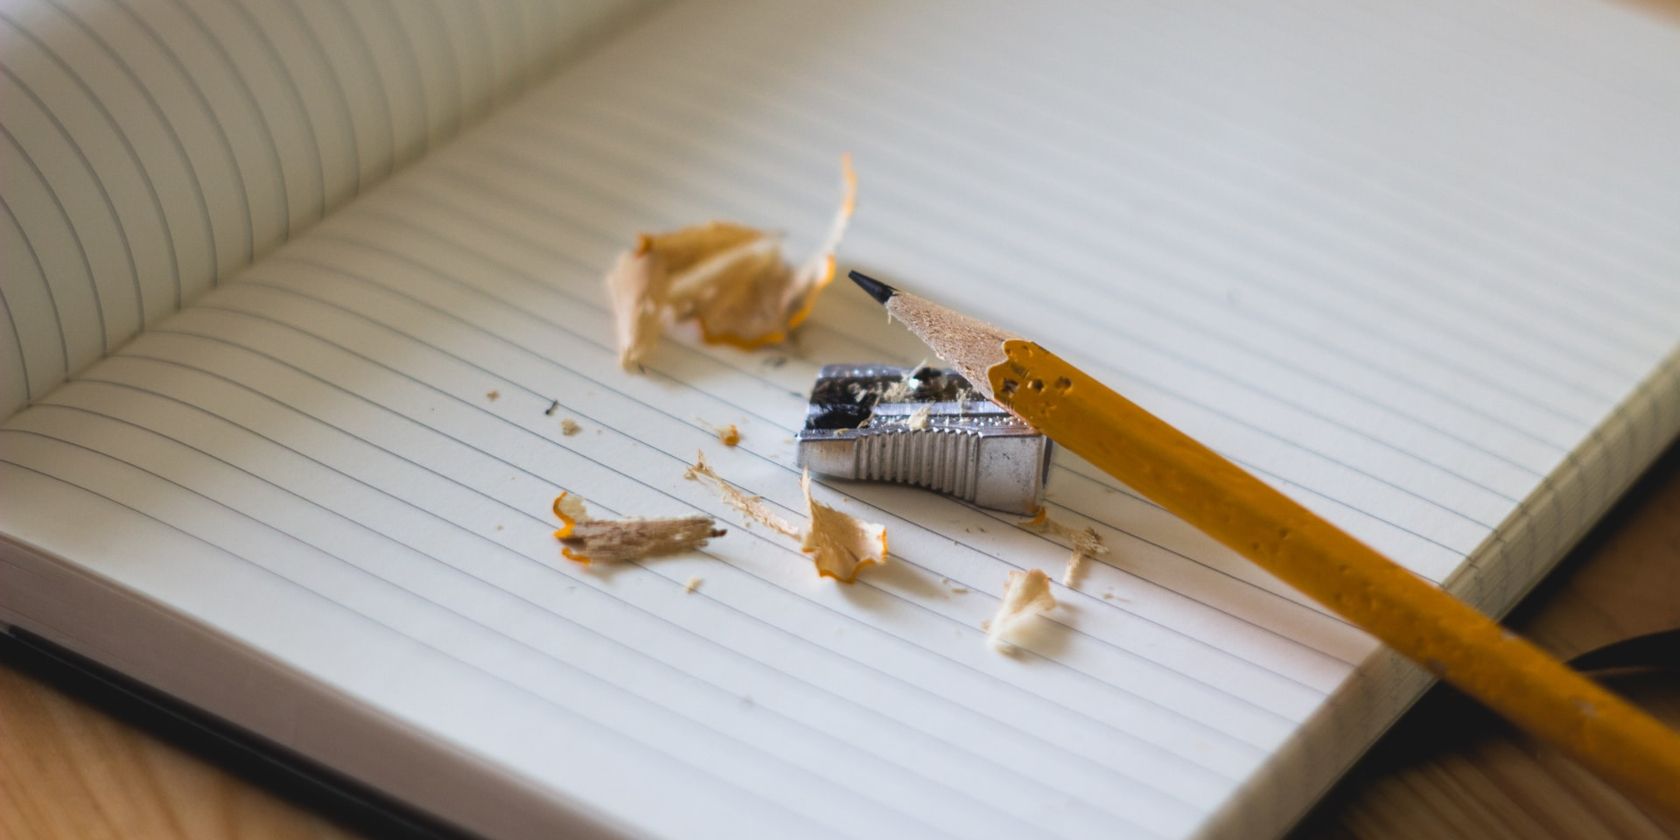 Pencil and Sharpener on Open Notebook